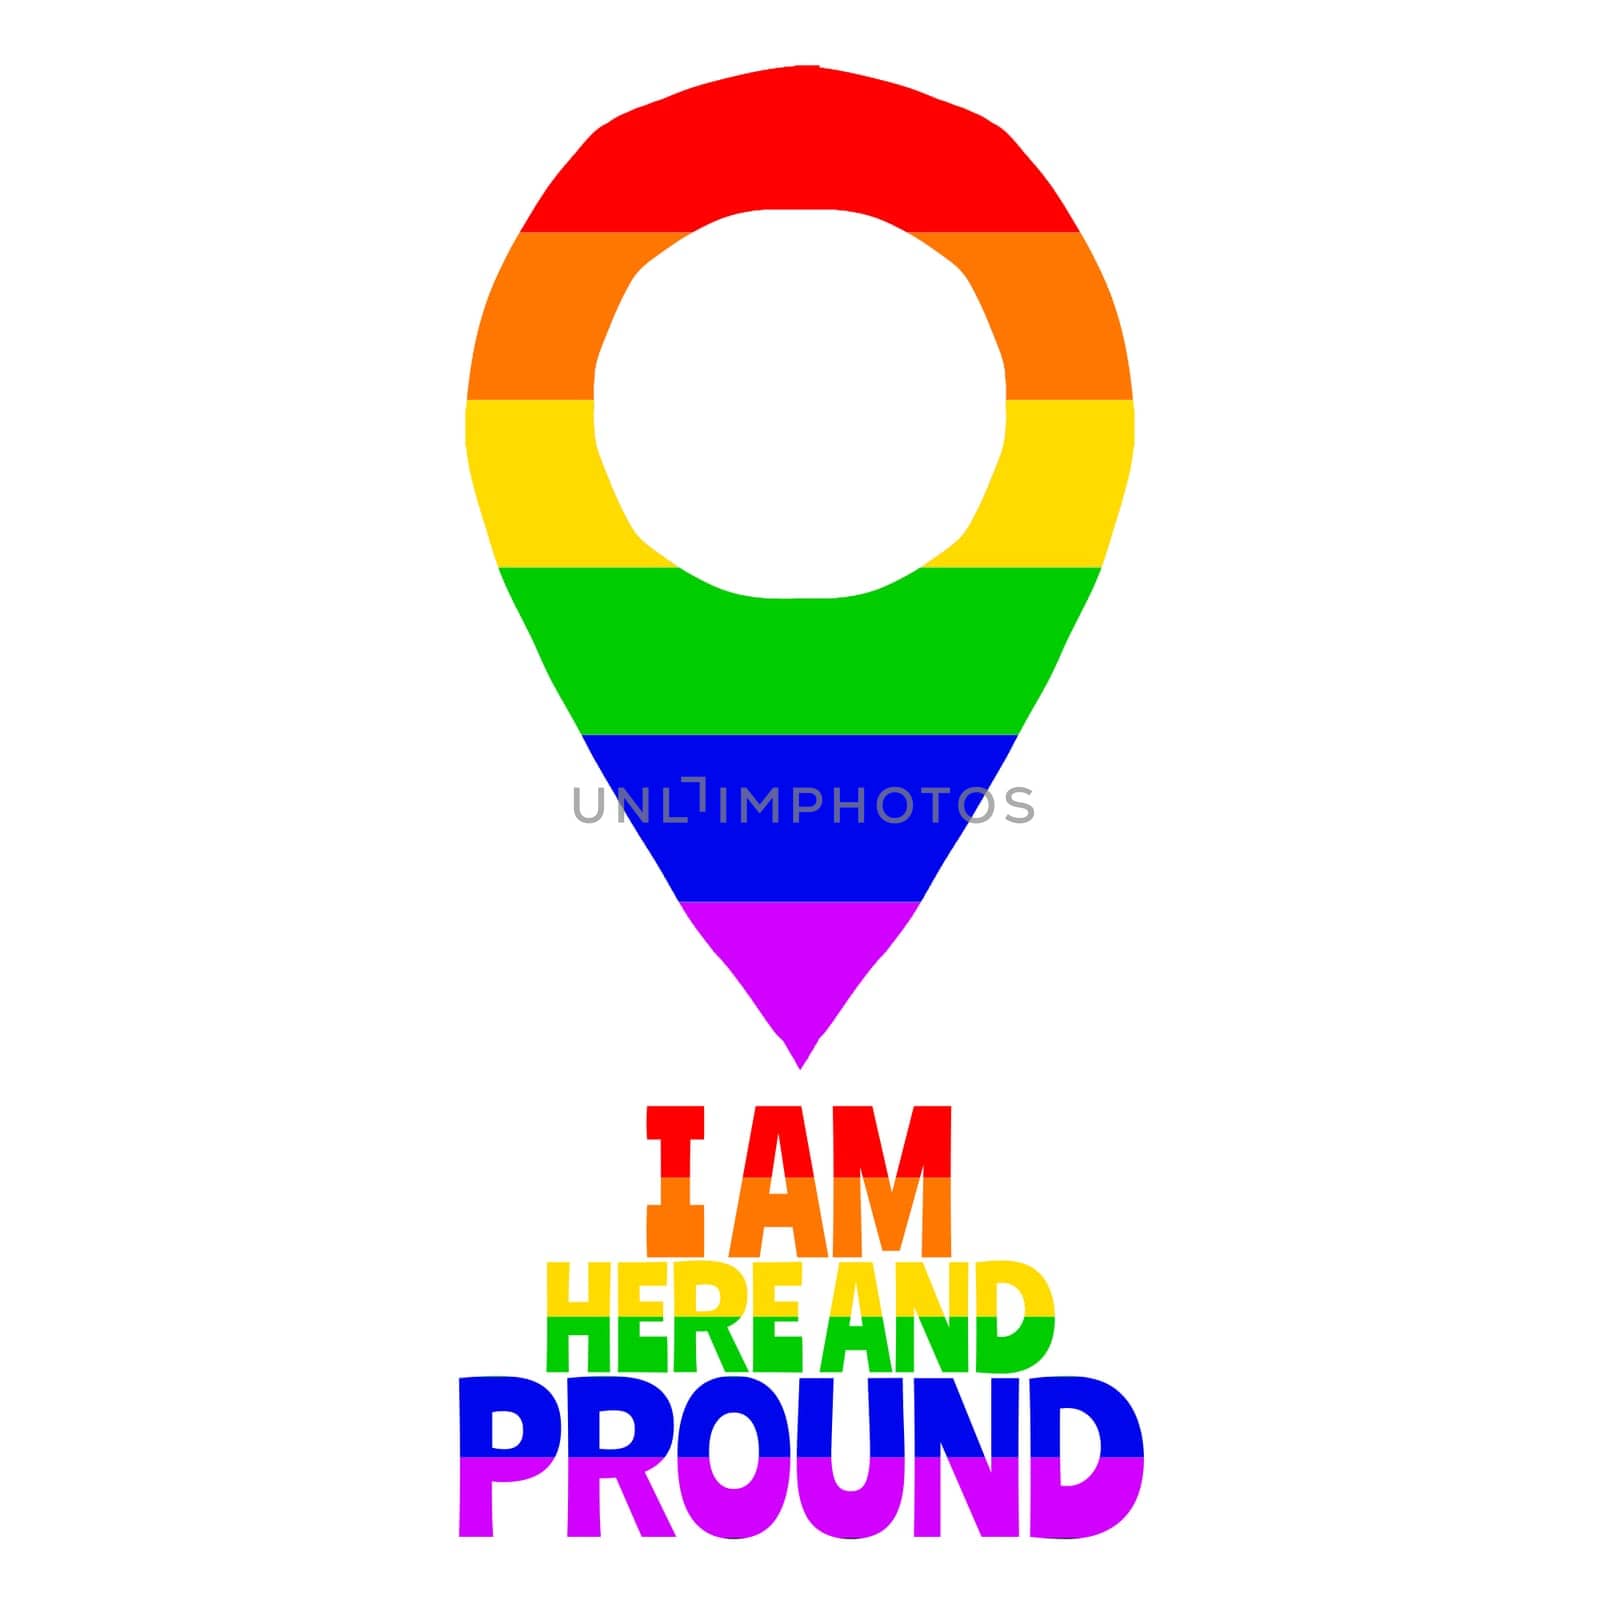 A LGBT marker with the text "I am here and proud".